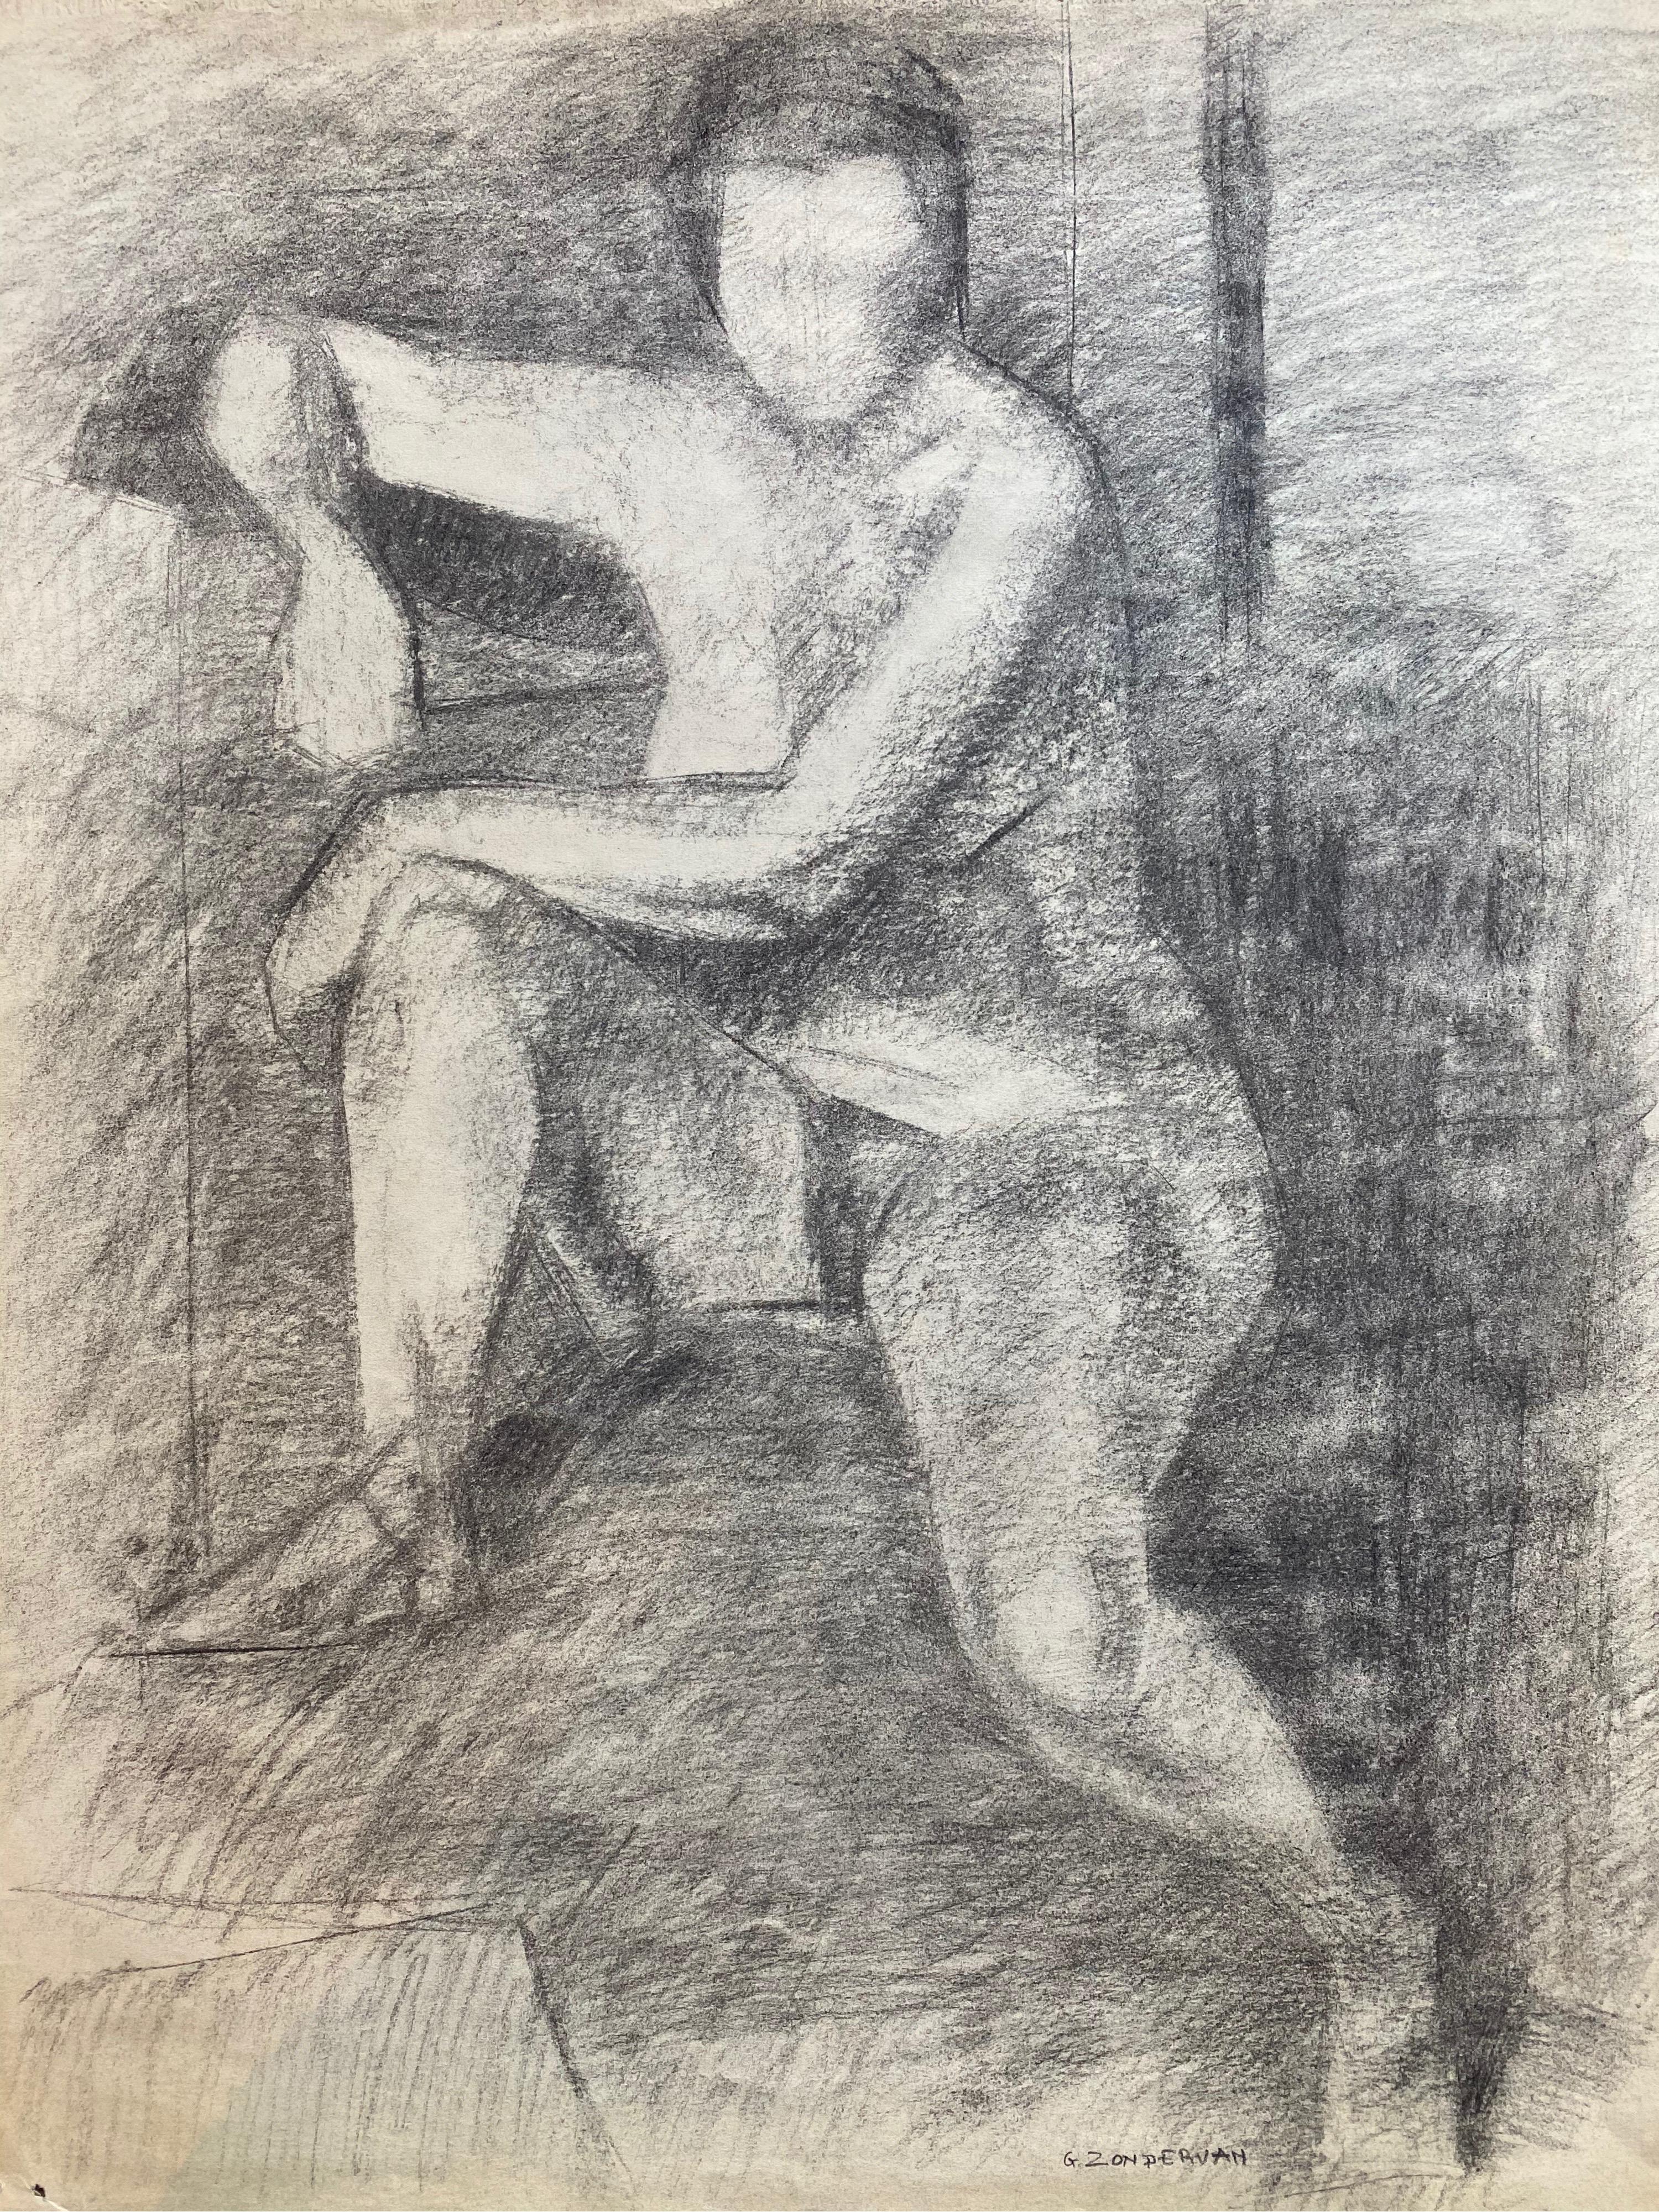 Mid 20th Century French Charcoal Drawing - Portrait of a Standing Nude Women - Post-Impressionist Art by GENEVIEVE ZONDERVAN (1922-2013)